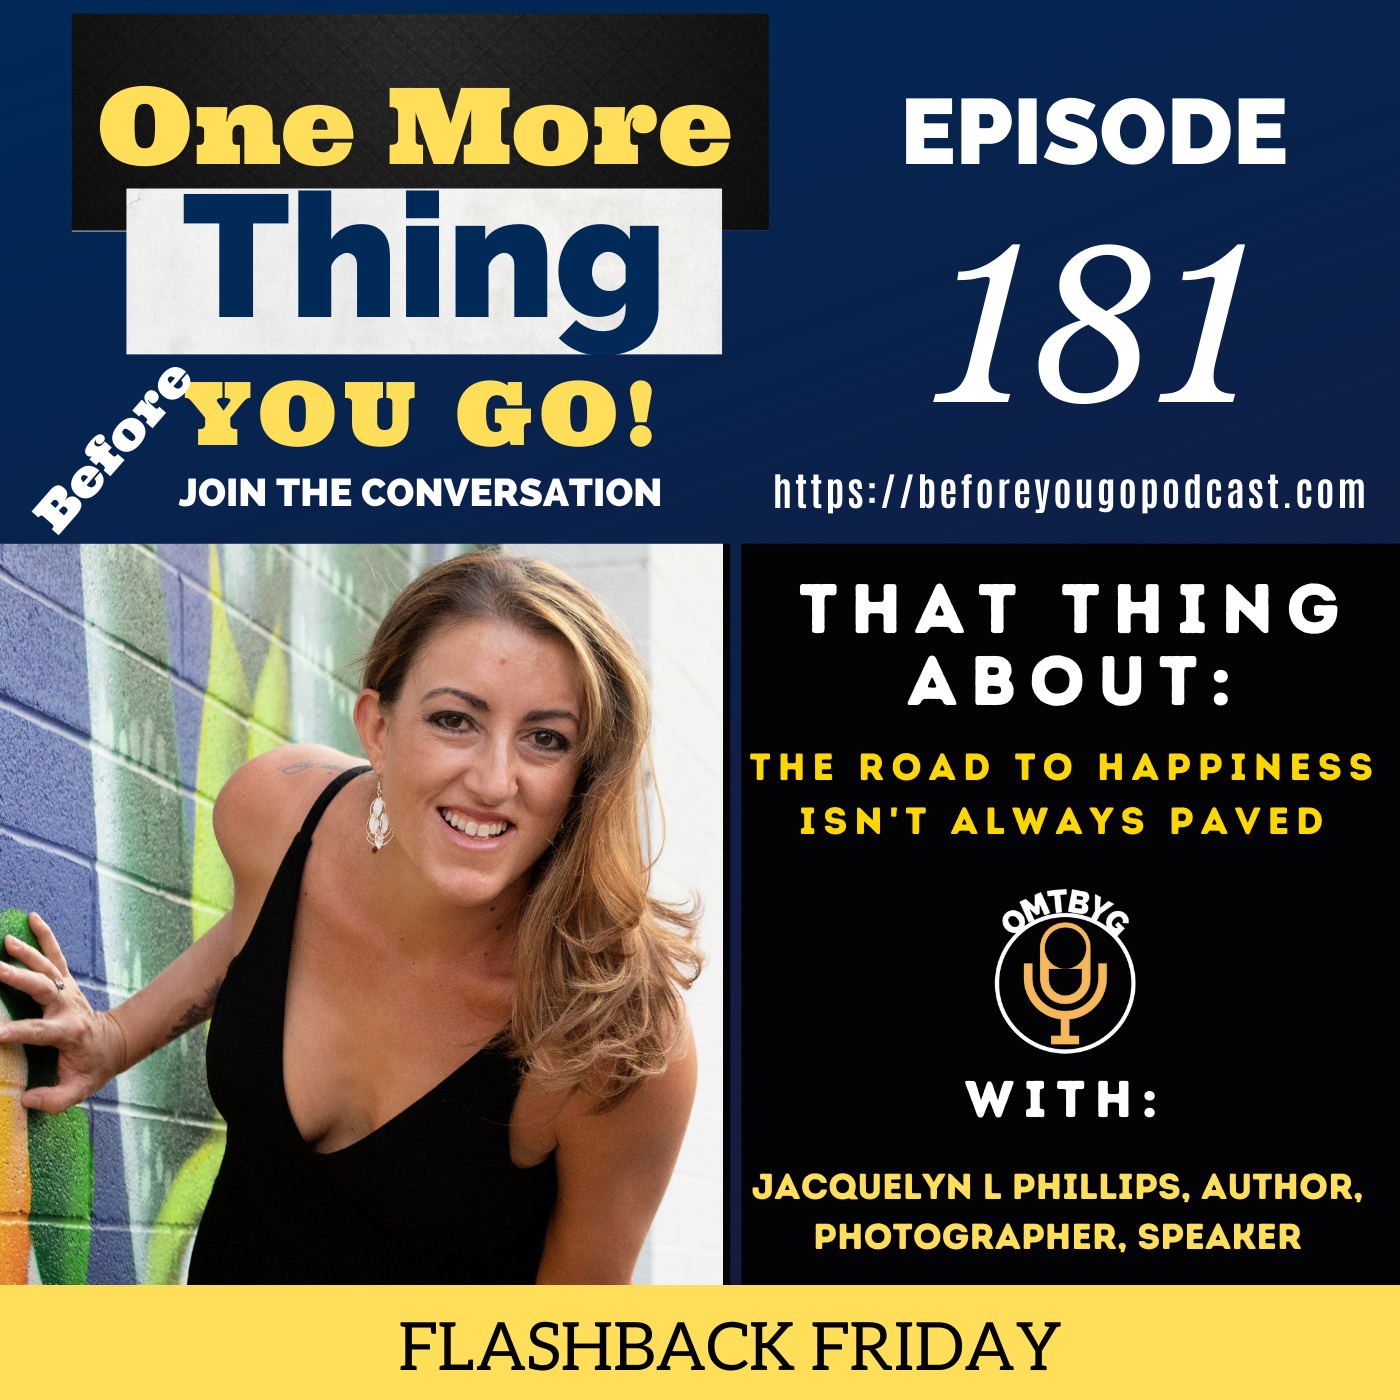 Flashback Friday! : That Thing About The Road to Happiness isn't Always Paved Image